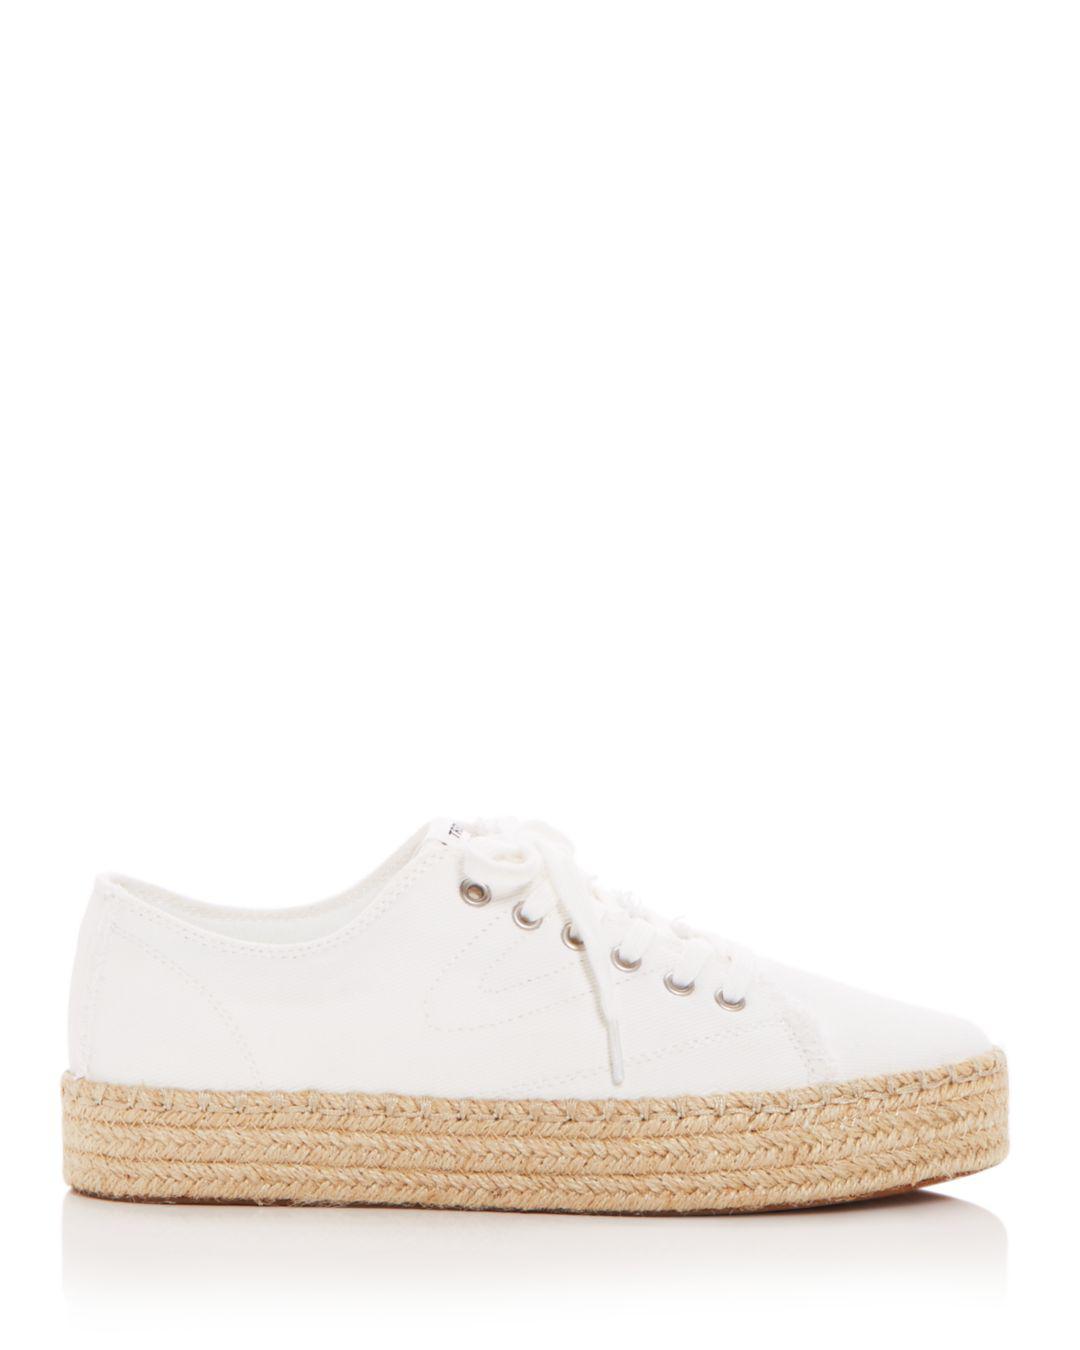 Tretorn Women's Eve Lace Up Platform Espadrille Sneakers in White | Lyst